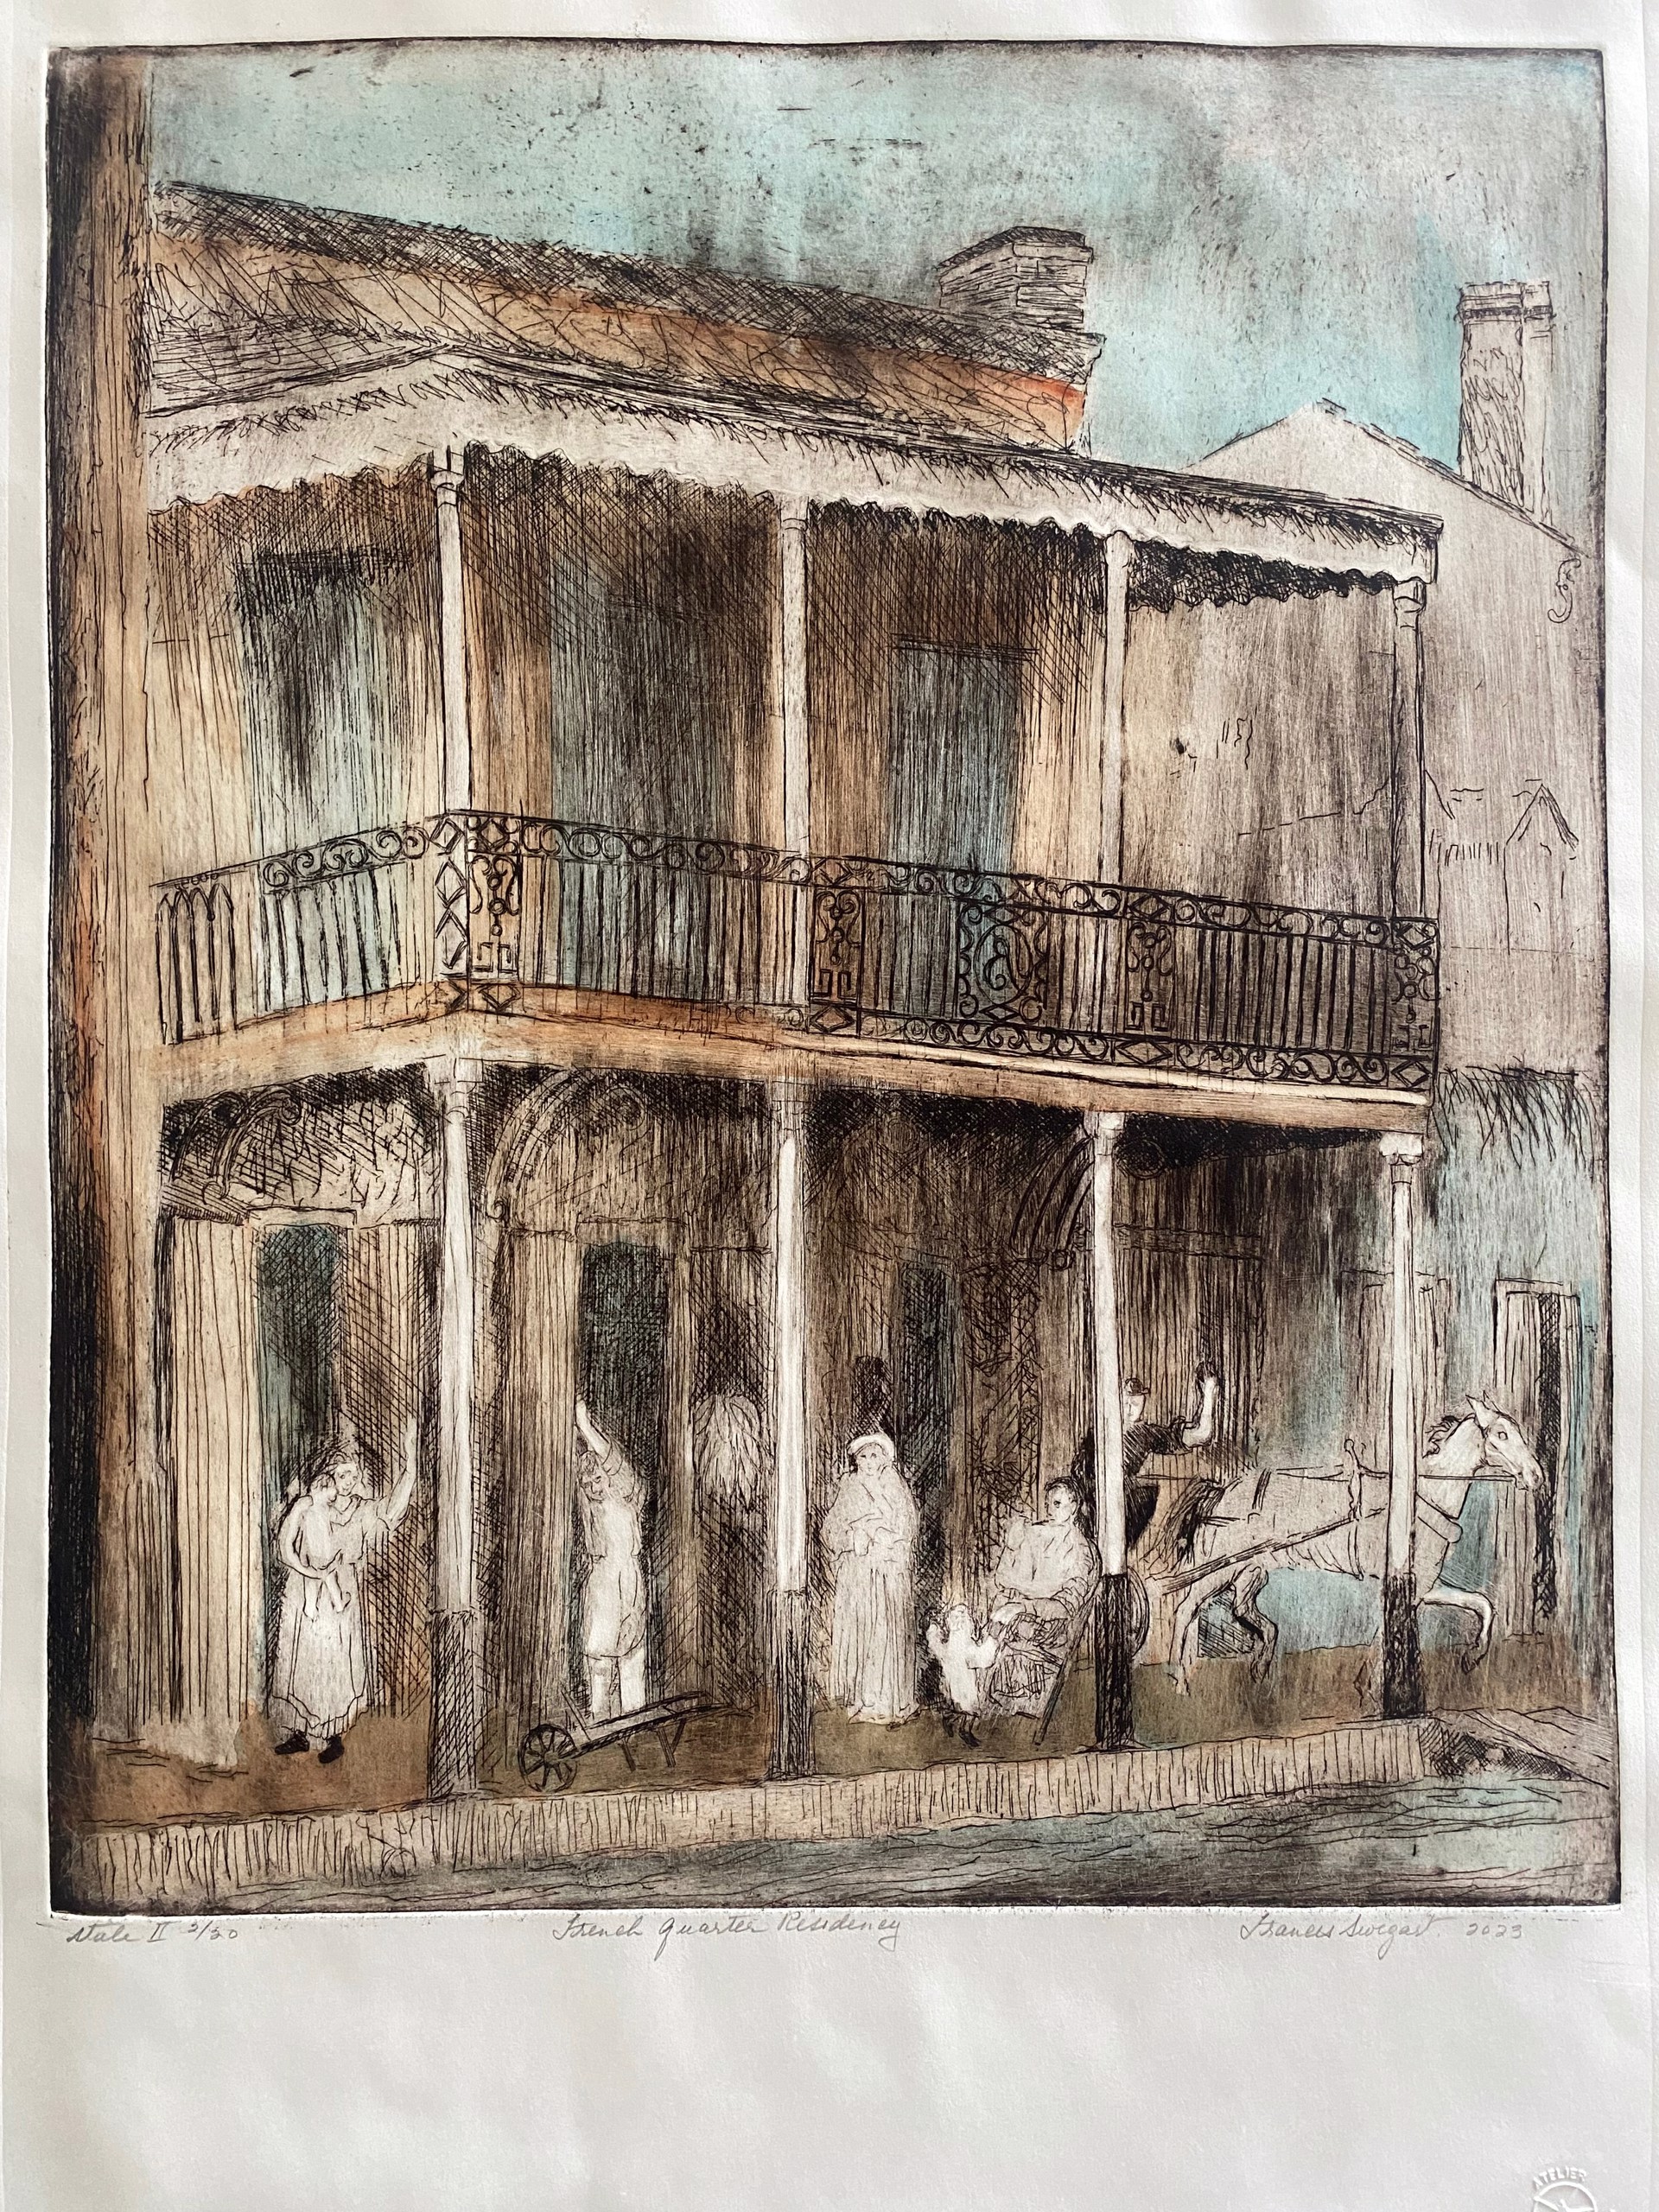 French Quarter Residency by Frances Swigart